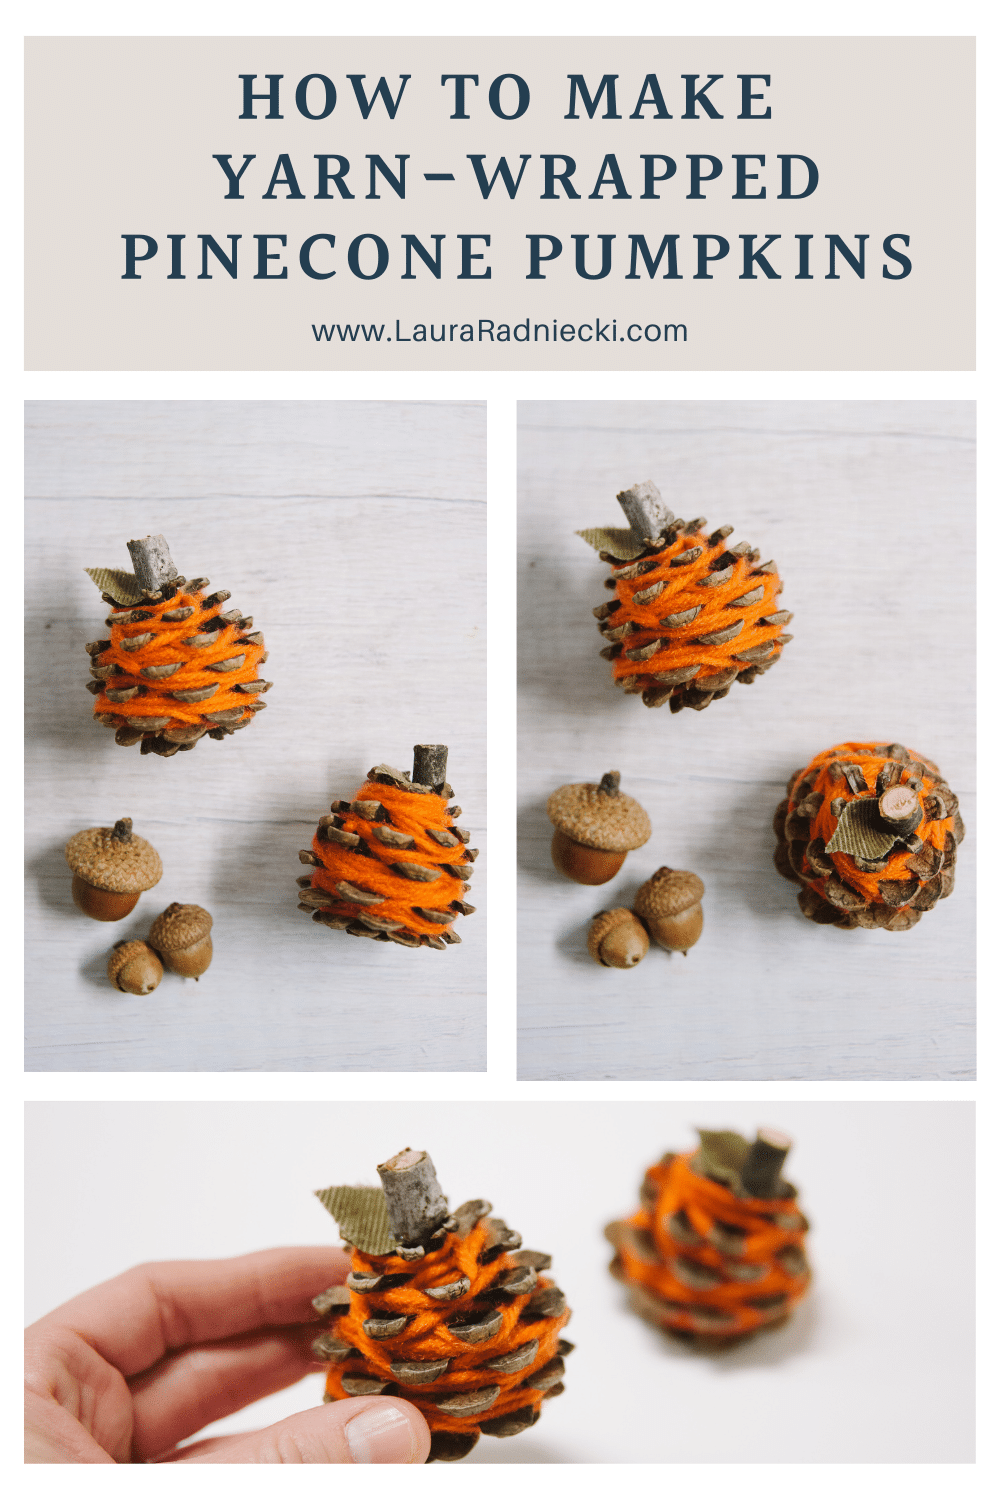 how to make yarn-wrapped pinecone pumpkins for fall decor